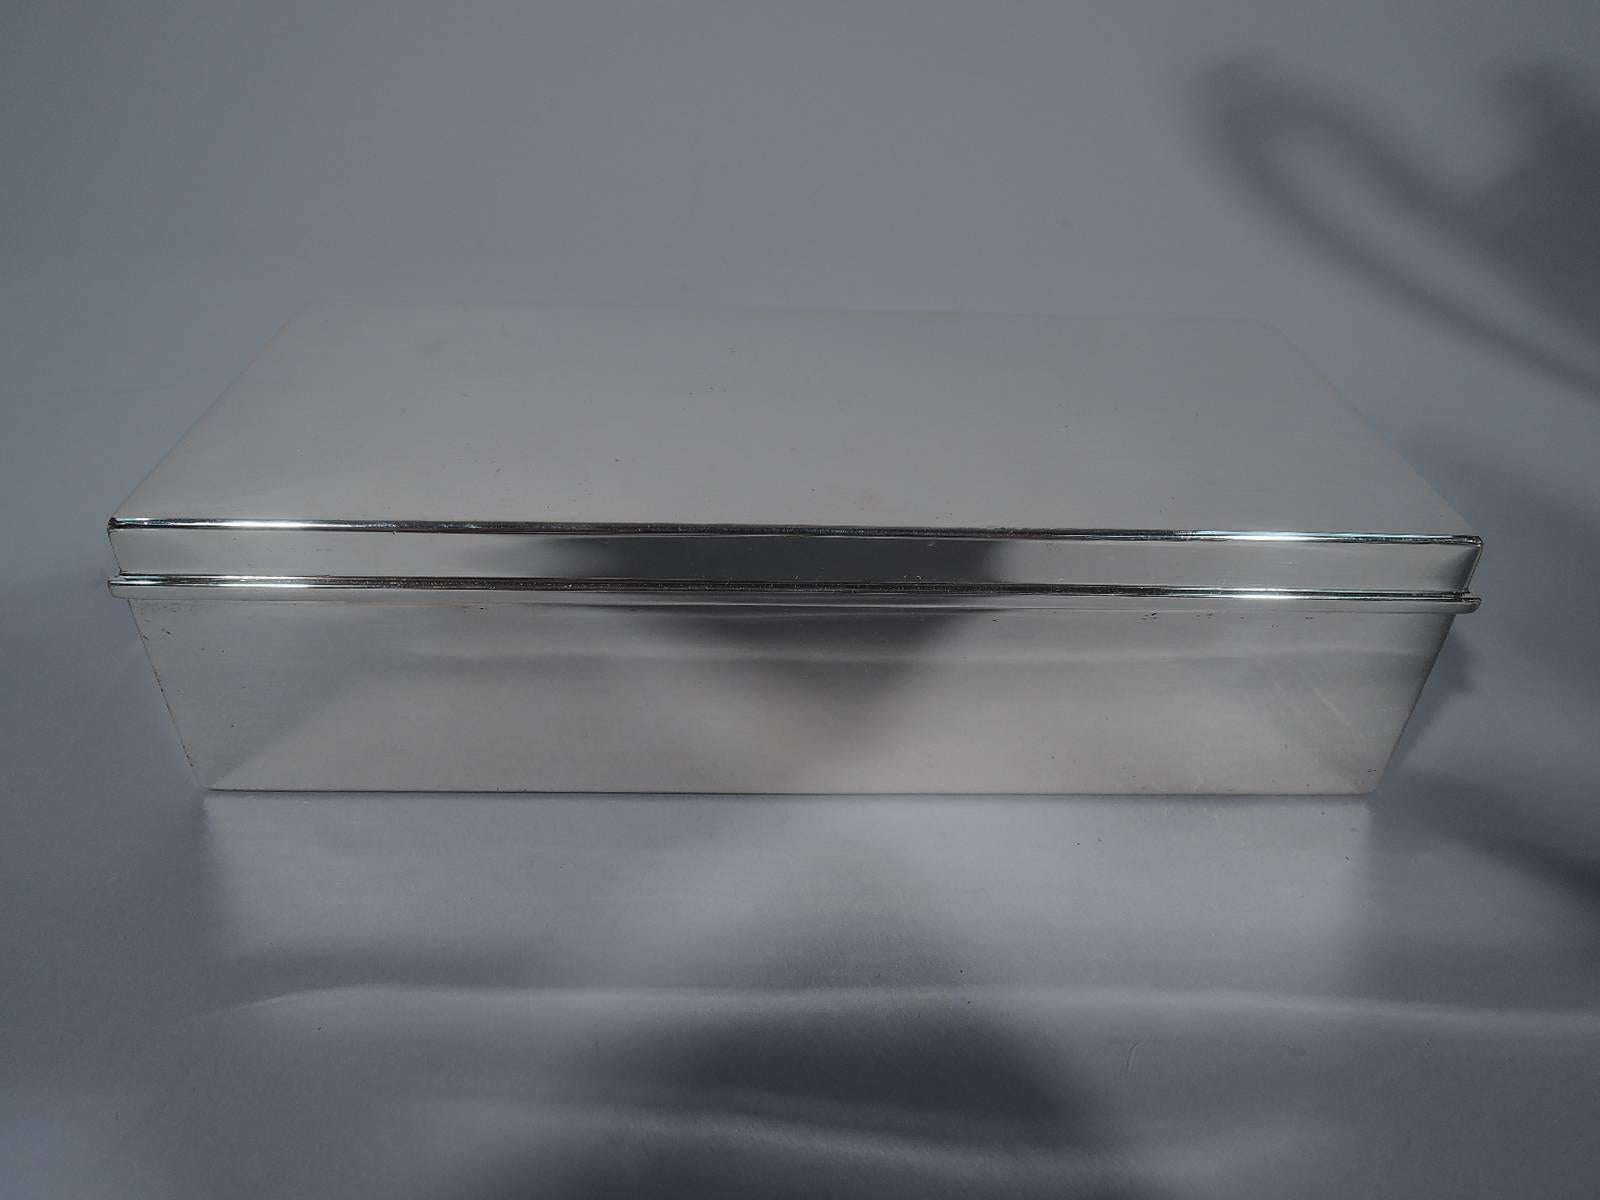 Stylish sterling silver desk box. Made by Tiffany & Co. in New York. Rectangular with straight sides and hinged cover with molded rim. Box interior is cedar-lined and partitioned. Cover interior has gilt wash. Hallmark includes director's letter M